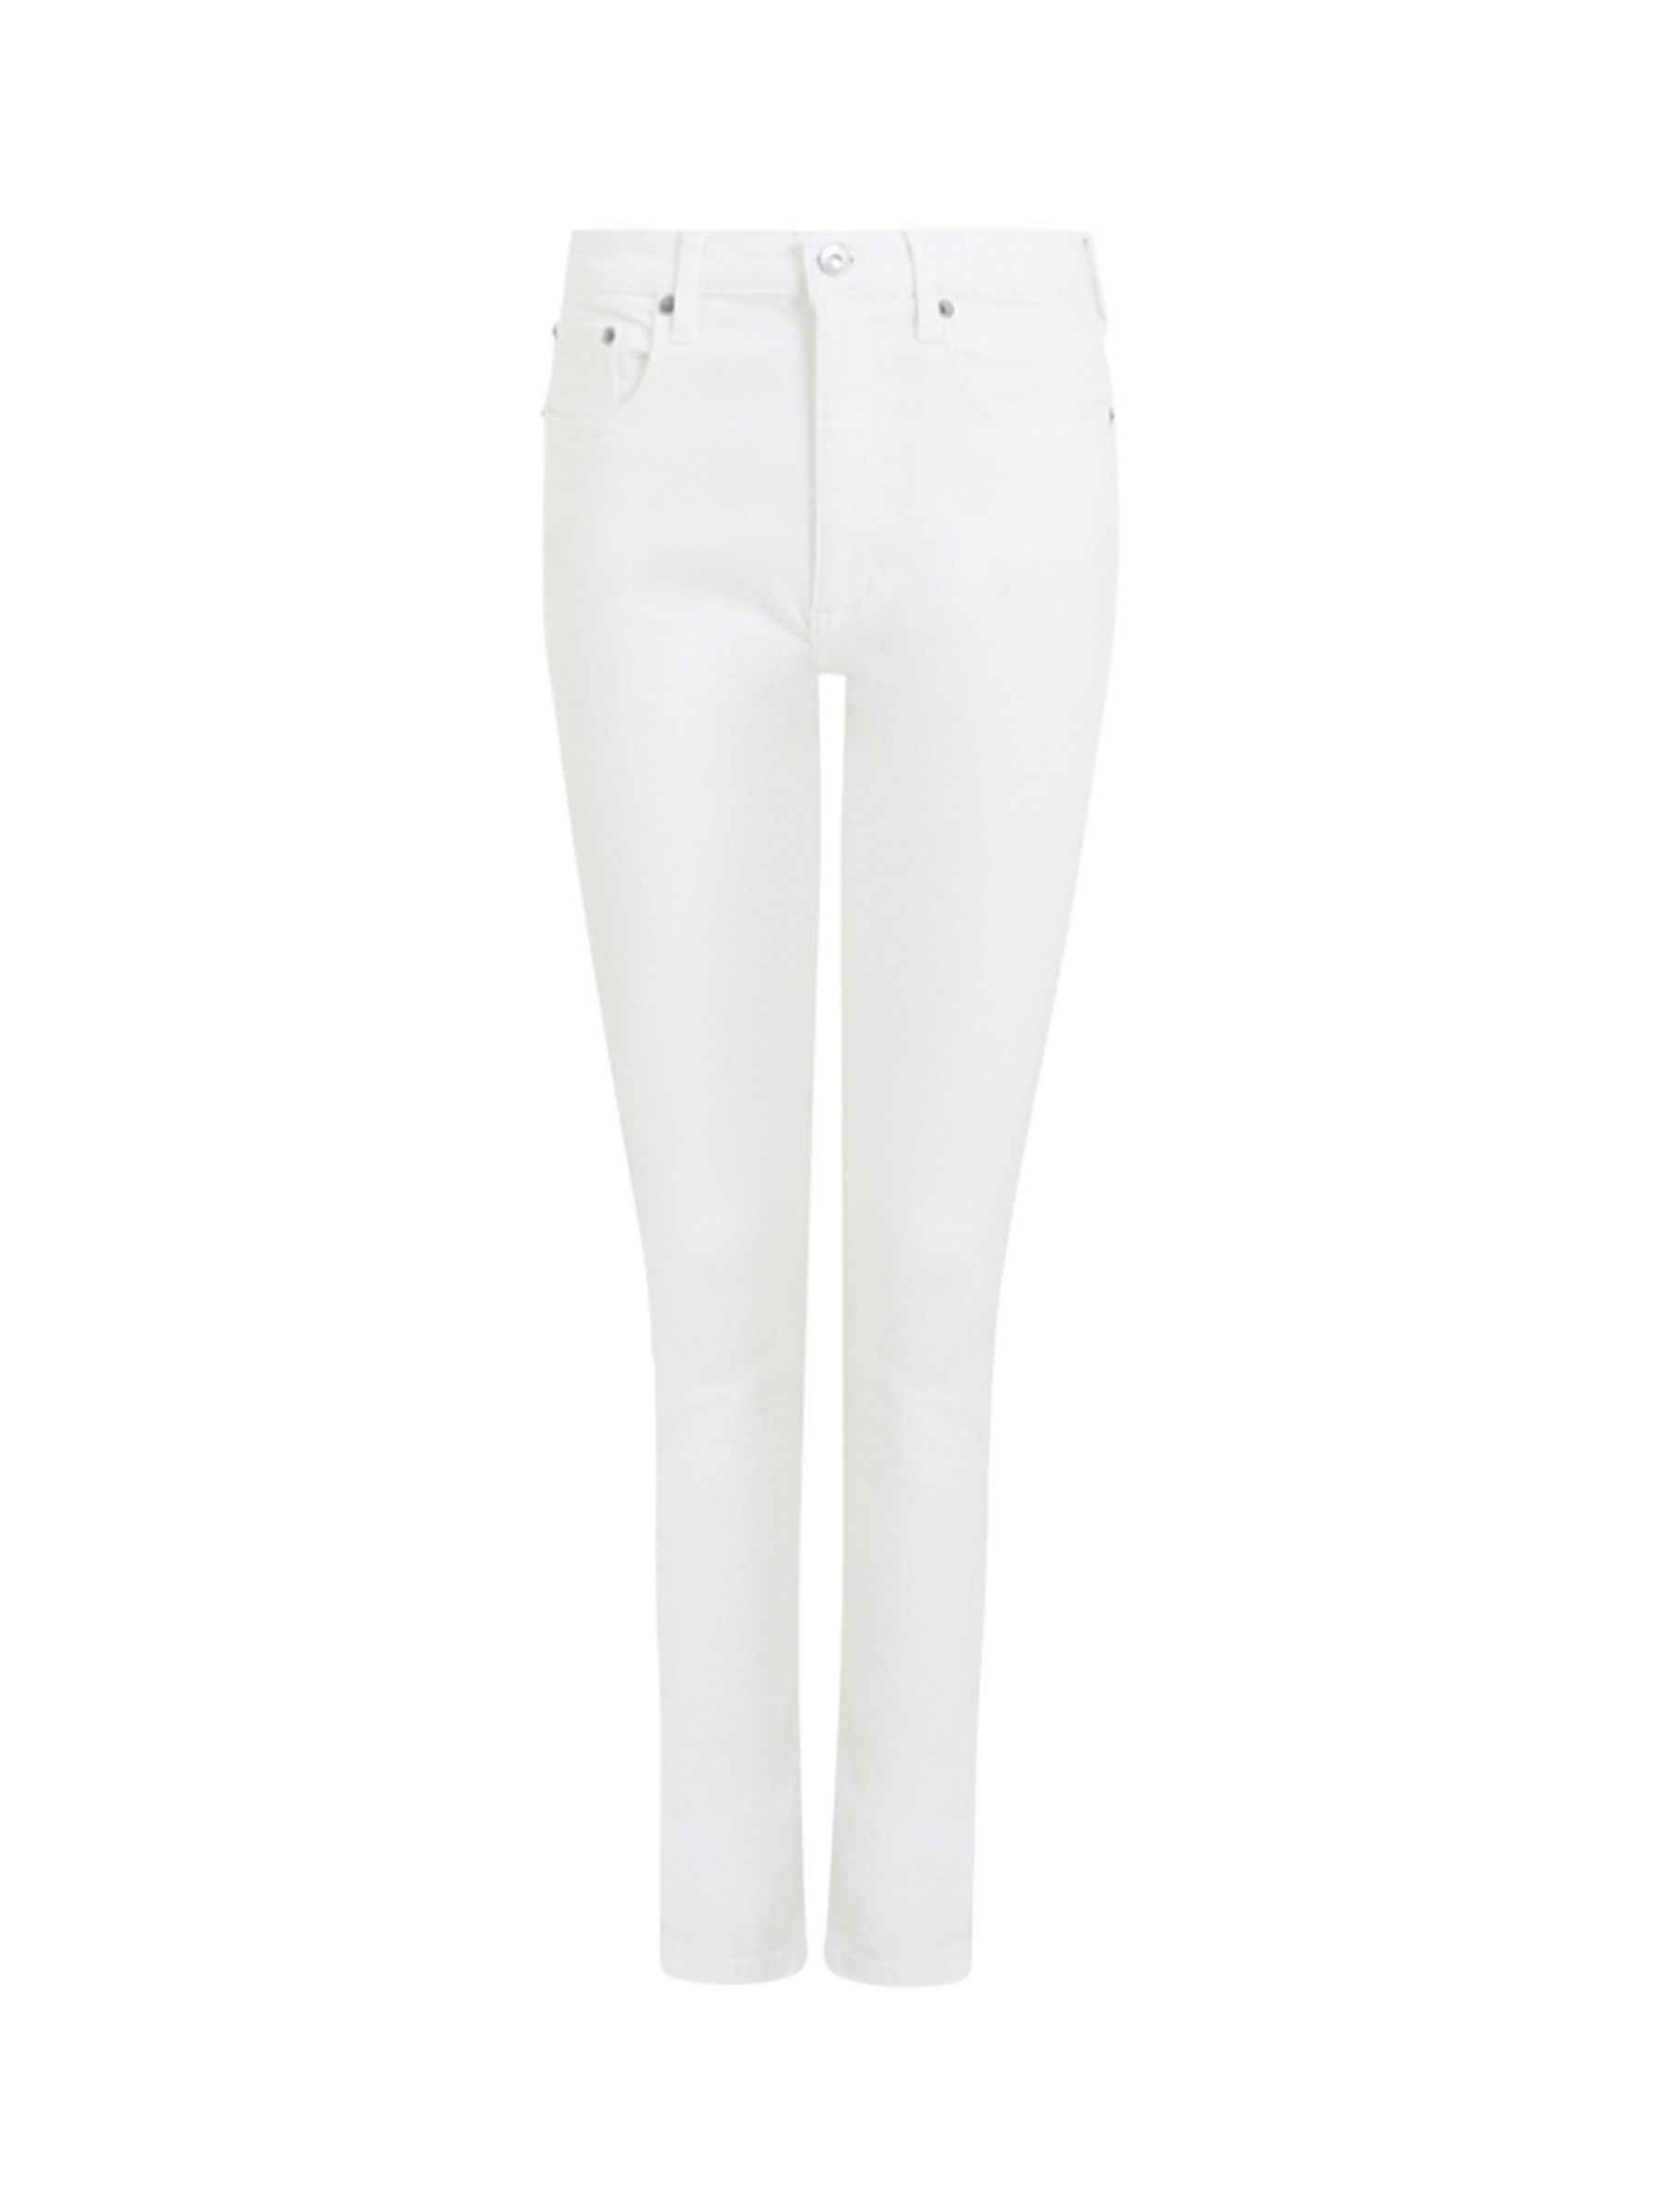 French Connection Rebound Skinny Jeans, White, 10